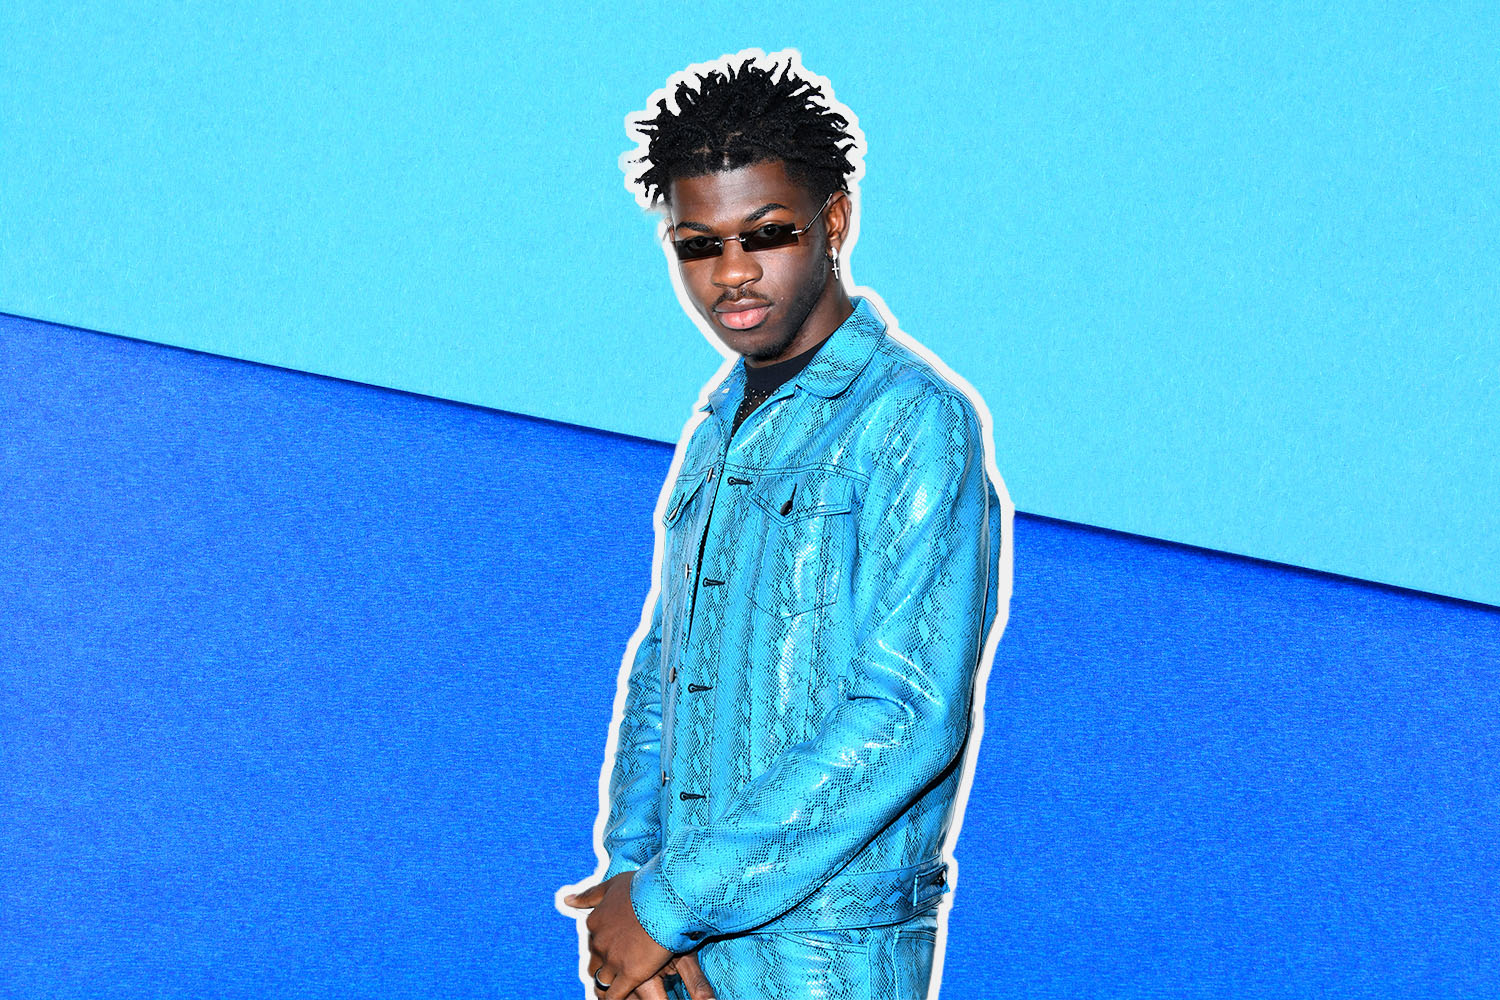 a photo of lil nas x wearing sunglasses against a two-toned blue background